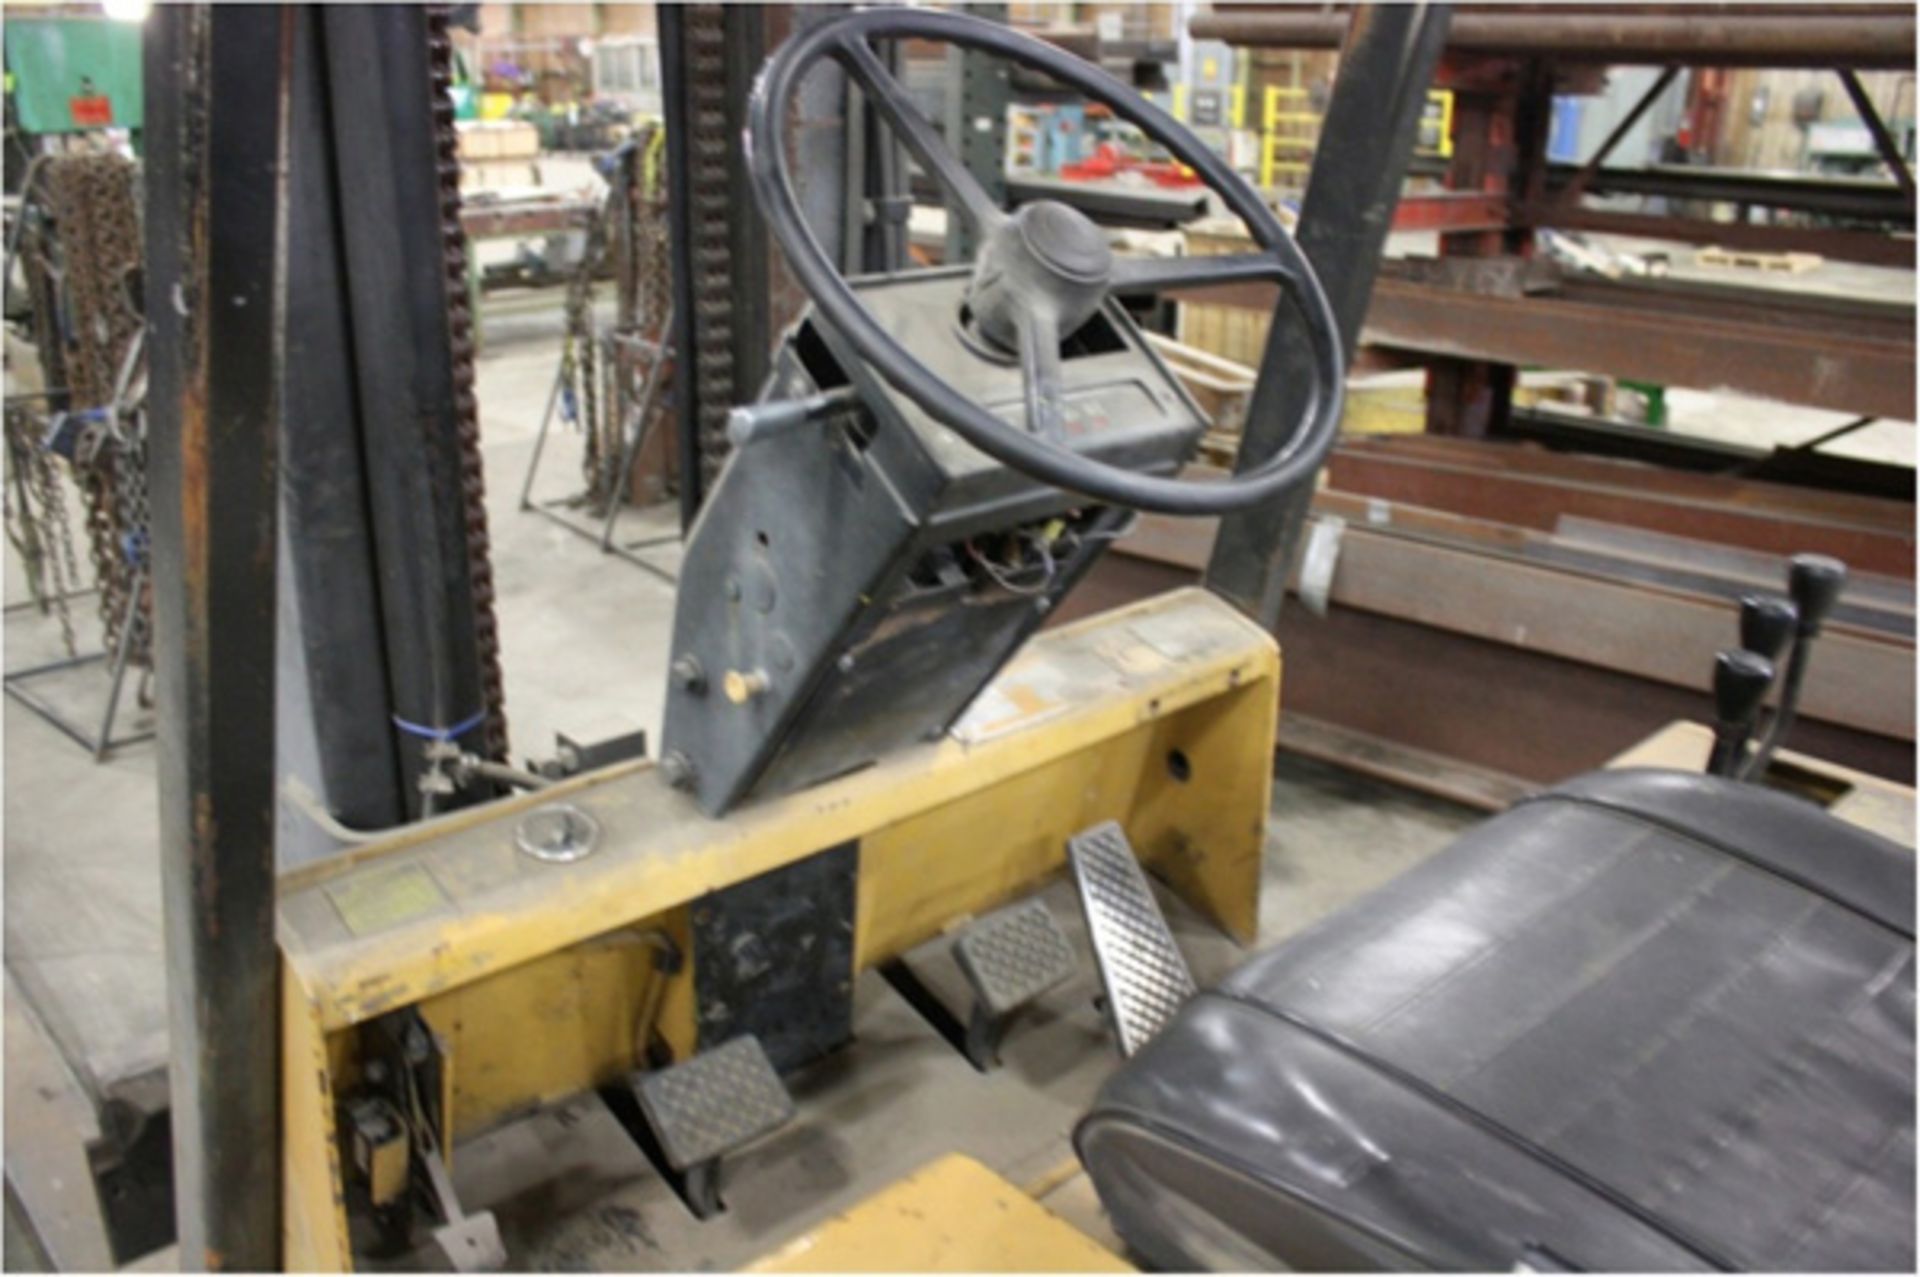 Caterpillar Forklift | 10,000 Lbs., Mdl: T80D, S/N: 5KB04810 - 6365P - Image 4 of 4